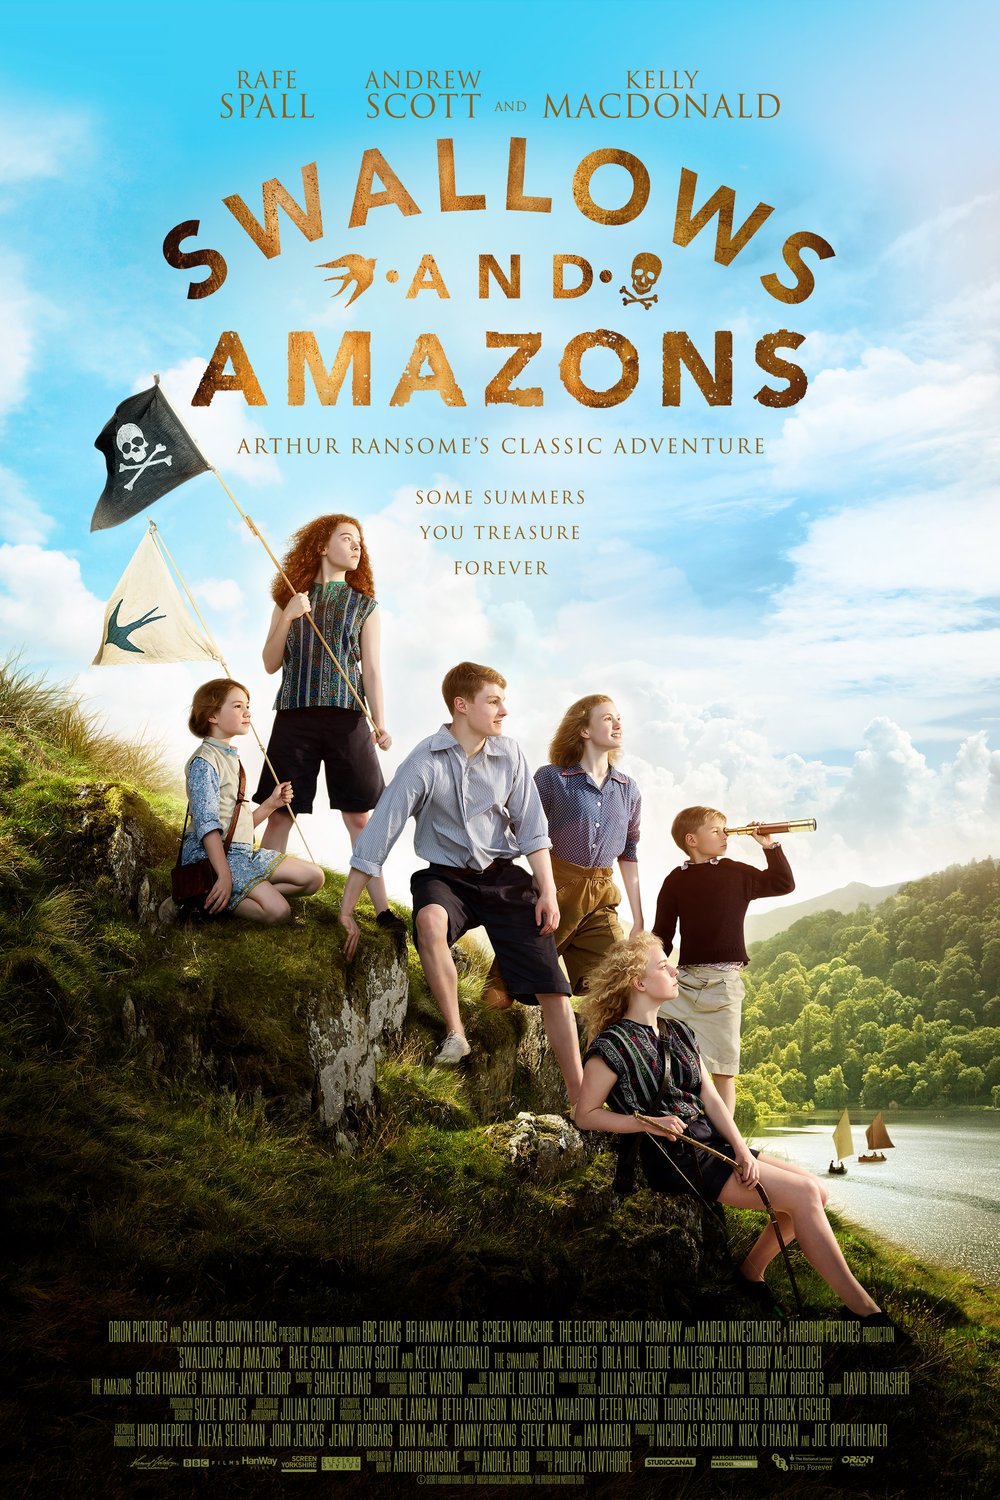 Poster of the movie Swallows and Amazons